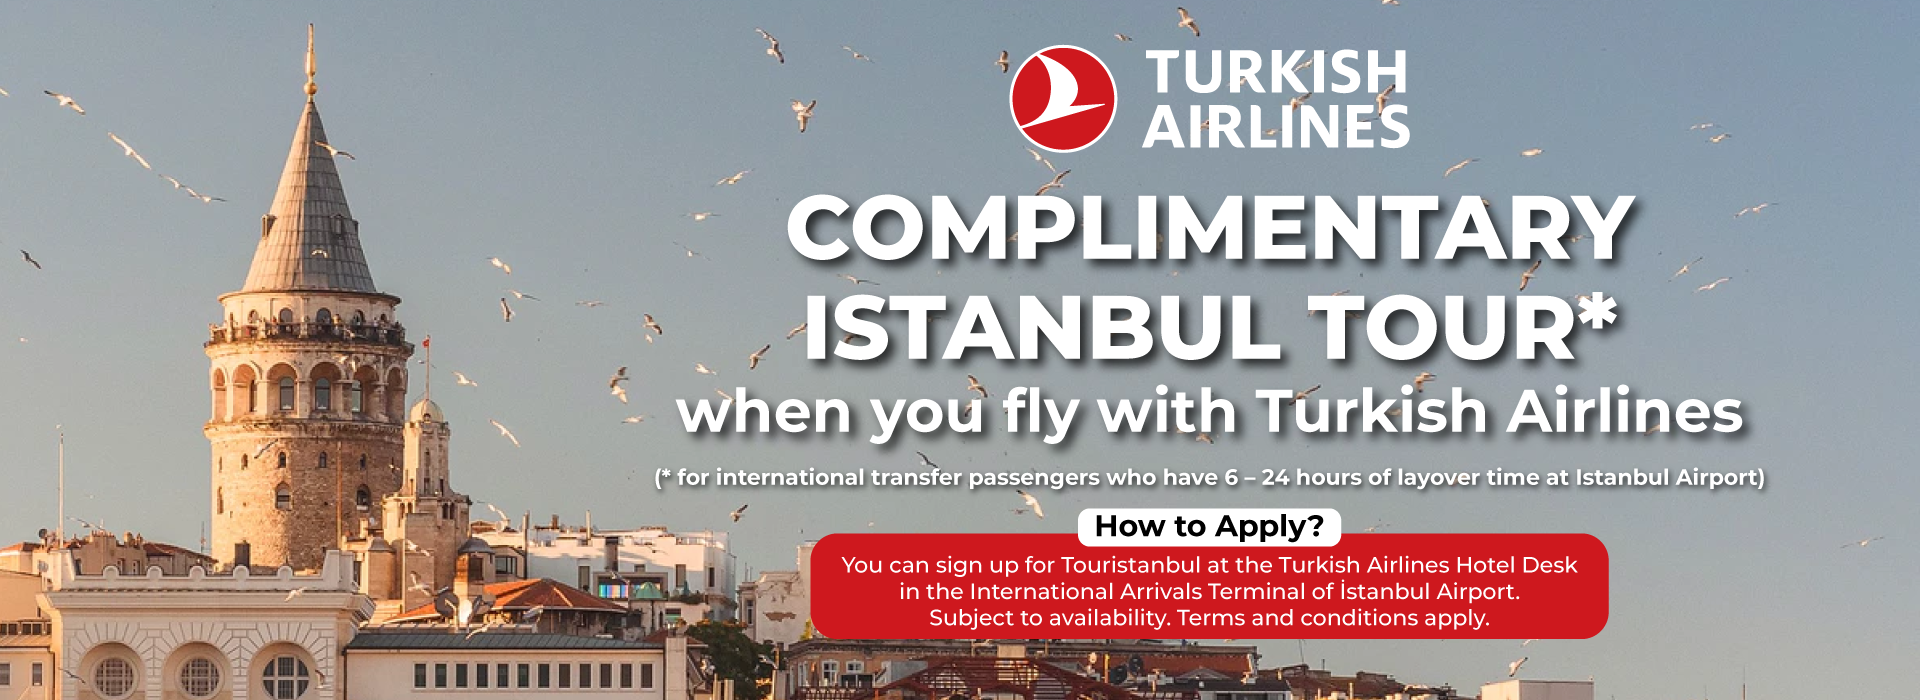 Turkish Airlines: Travel Fair Special TK Free Tour Istanbul Program